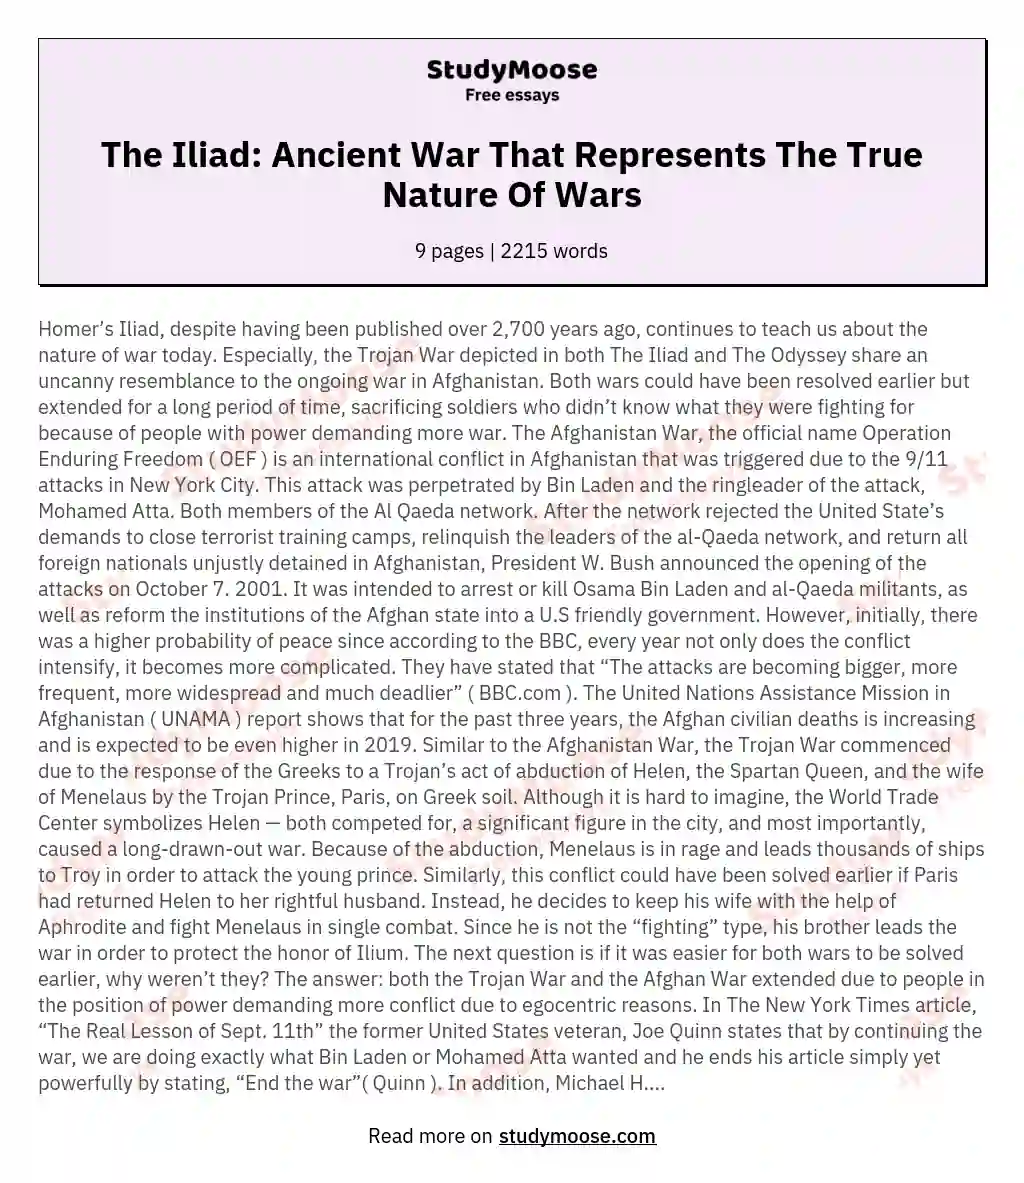 The Iliad: Ancient War That Represents The True Nature Of Wars